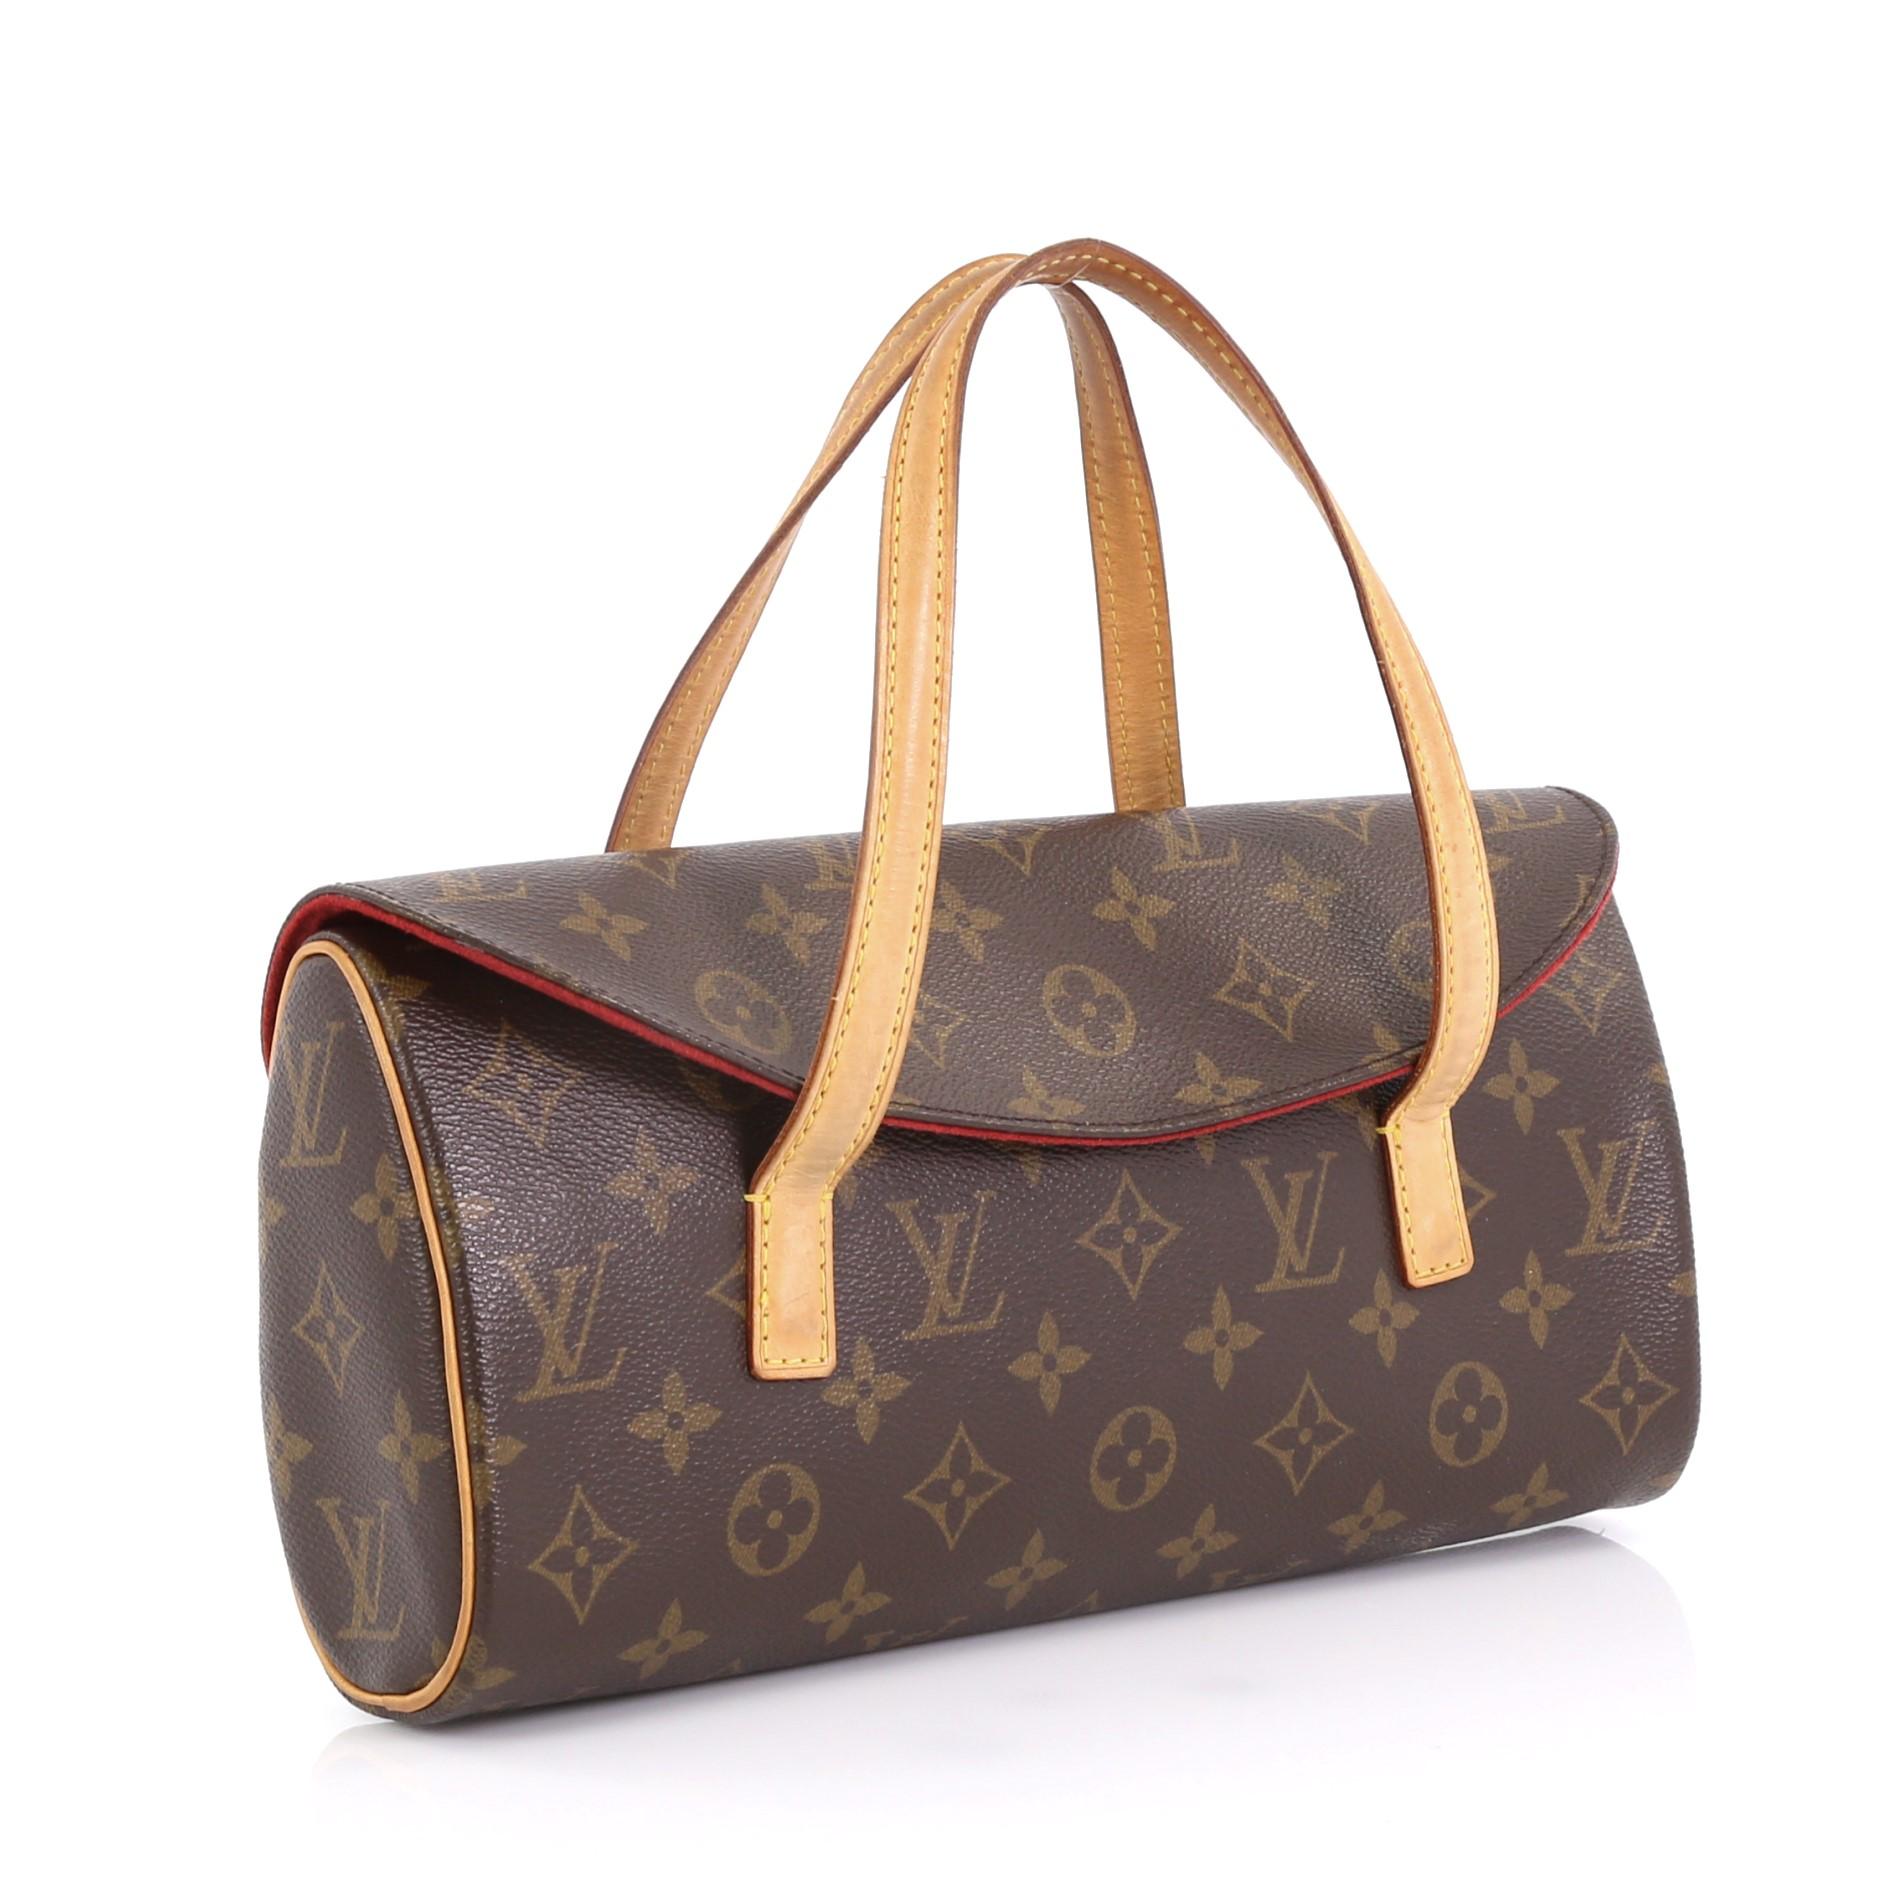 This Louis Vuitton Sonatine Monogram Canvas, crafted from brown monogram coated canvas, features dual flat vachetta leather handles, vachetta leather trim, and gold-tone hardware. Its flap with hidden magnetic snap closure opens to a red microfiber